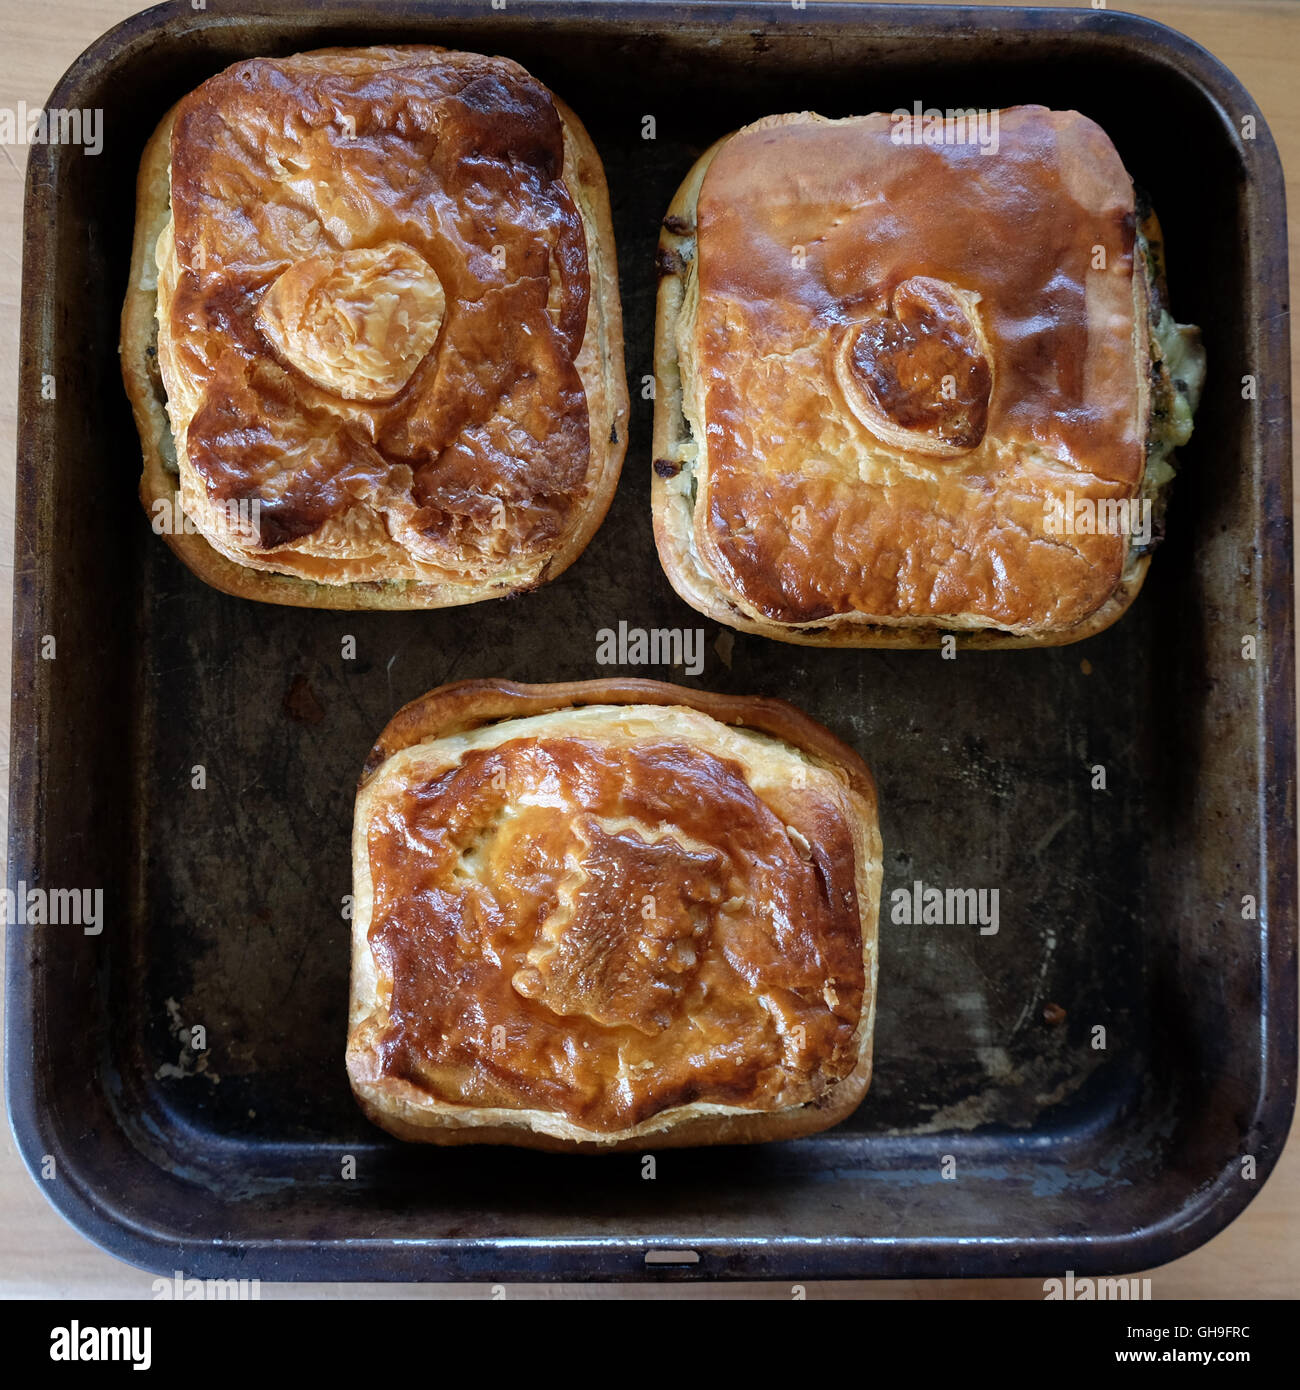 Savoury meat or vegetable pies on an old baking tray. Photographed in New Zealand, NZ. Stock Photo